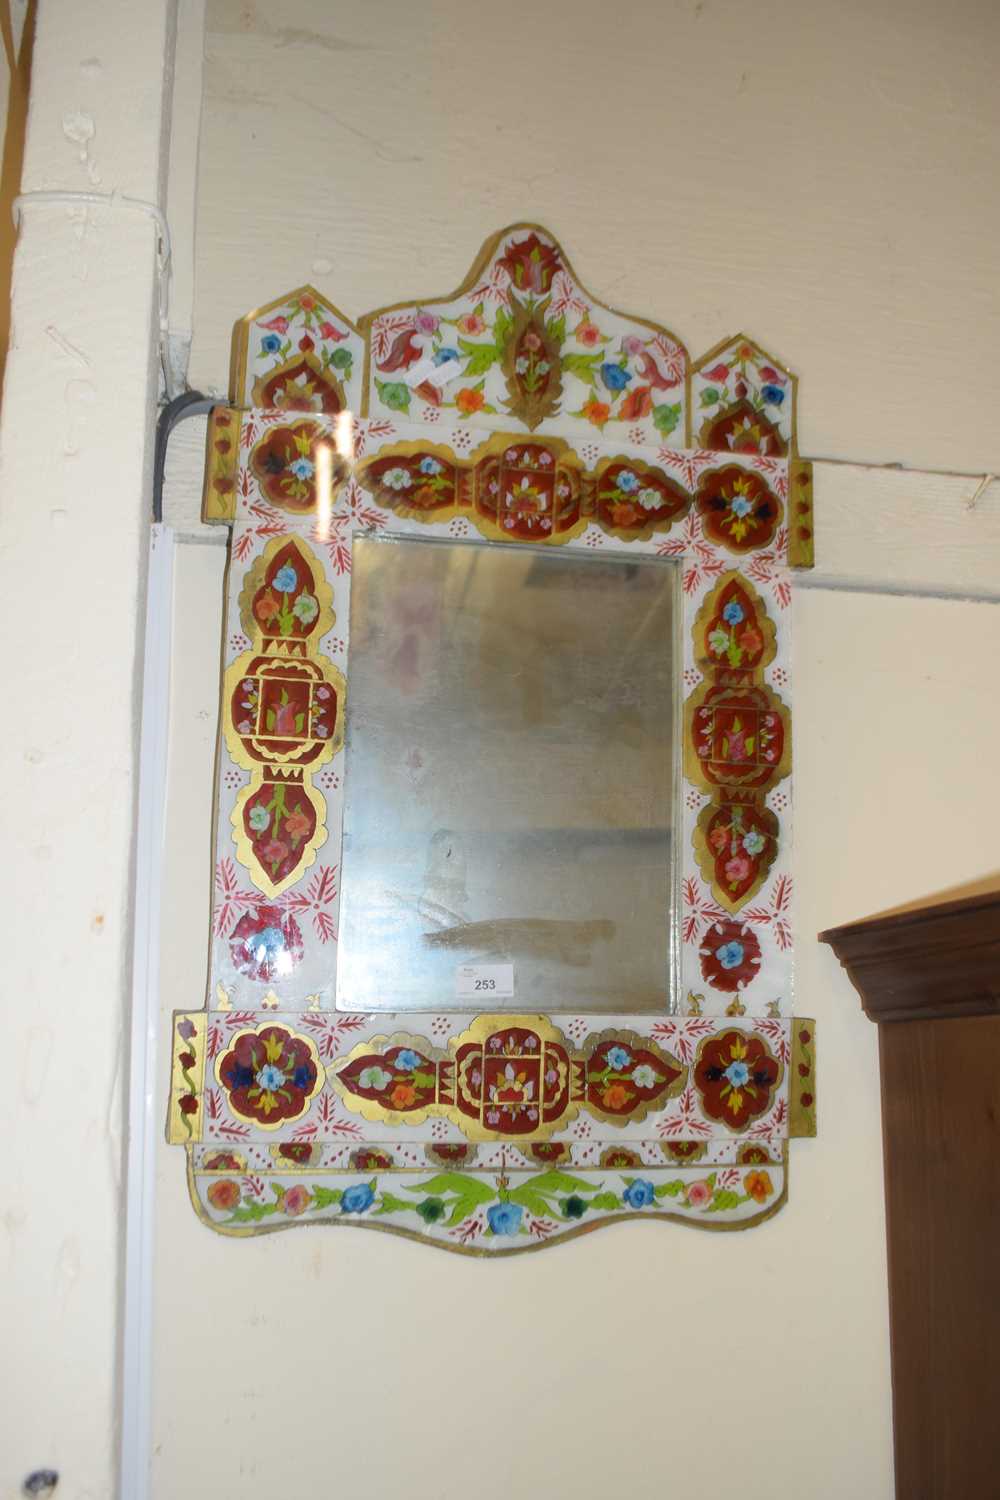 20th Century Indian wall mirror with decorated frame